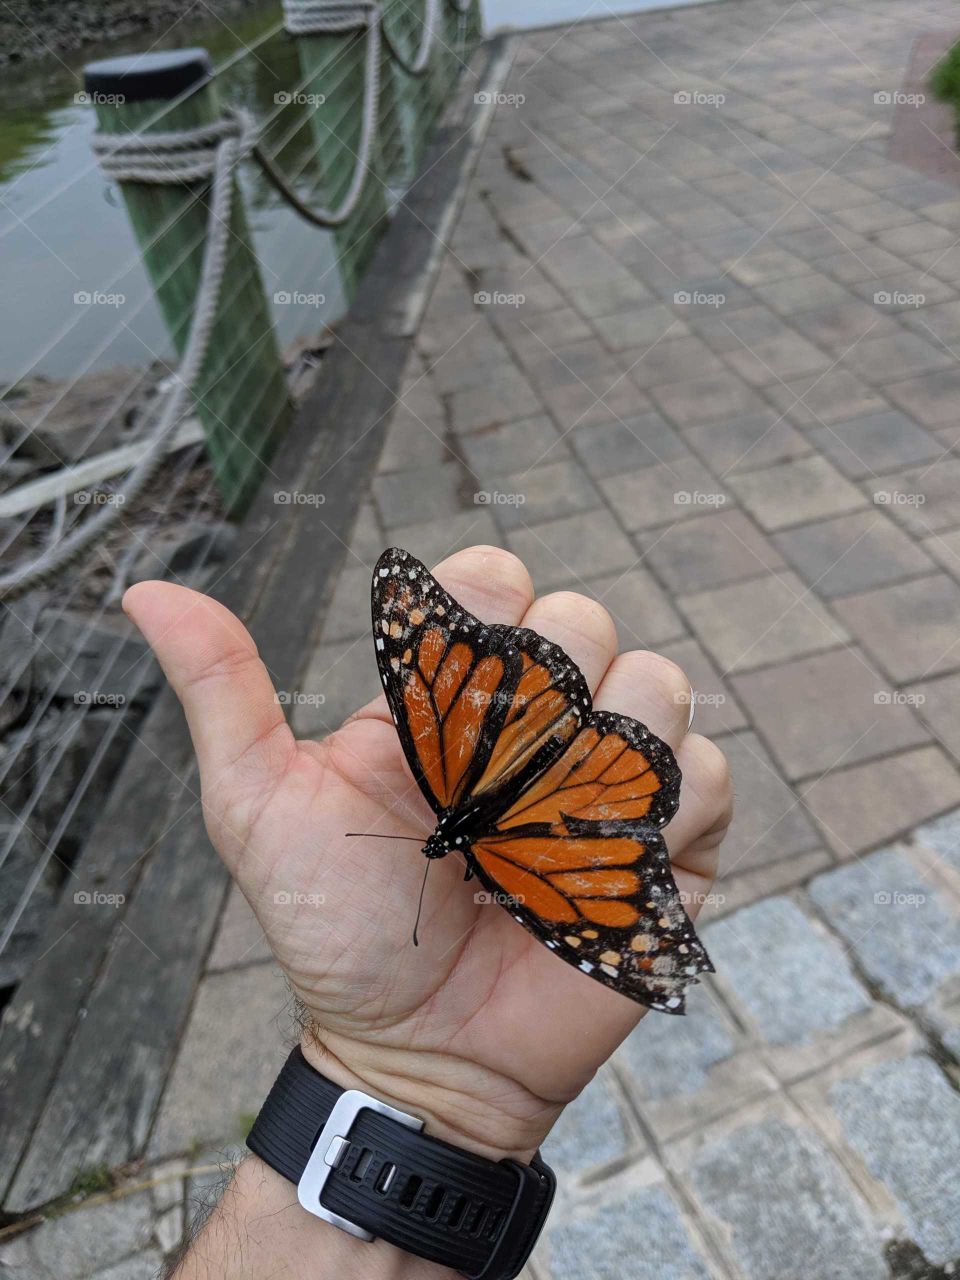 When a Monarch lands on you you take a picture